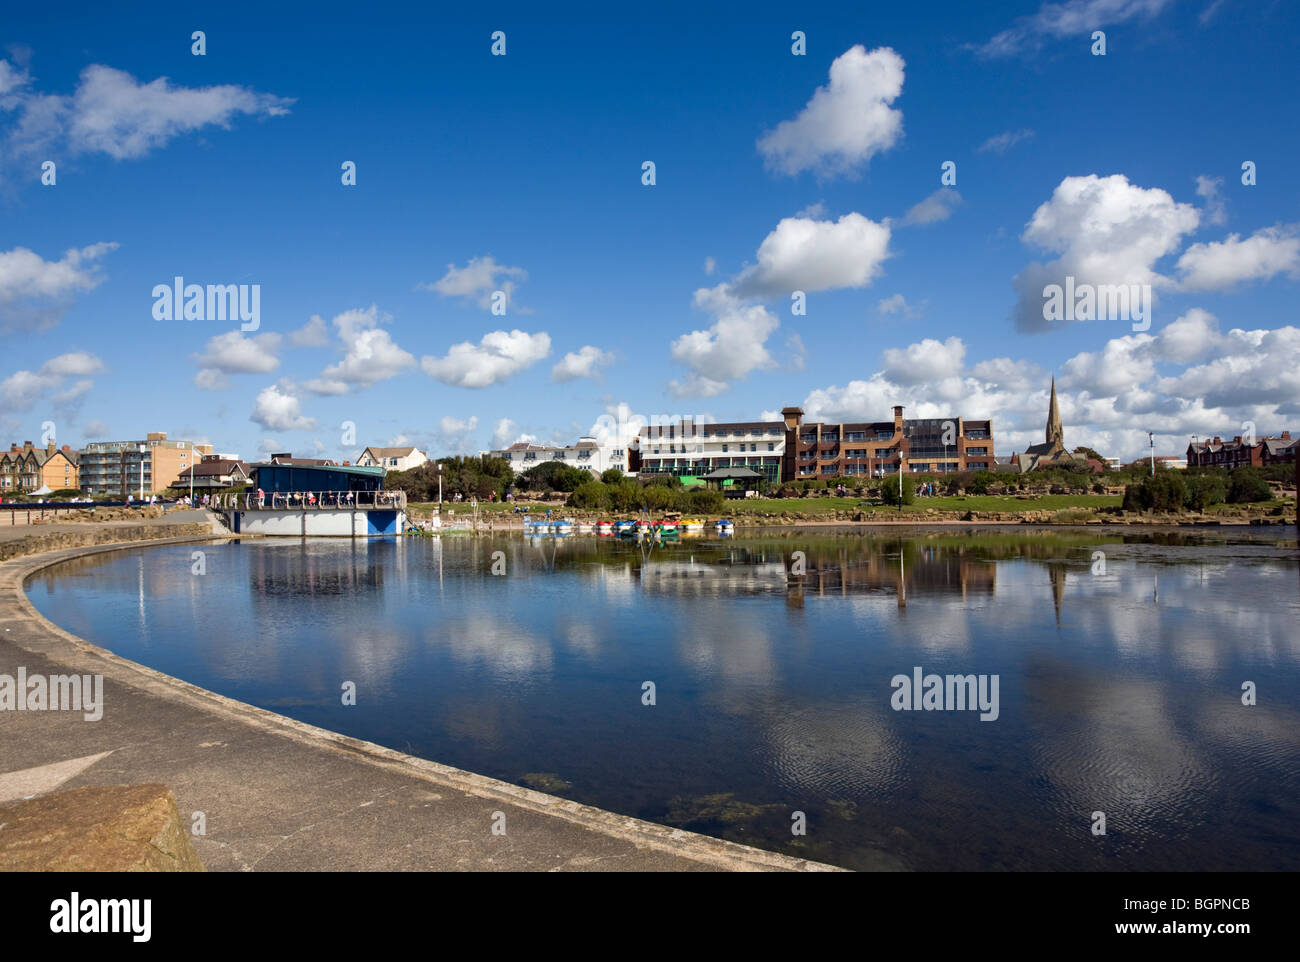 Boating pool on the promenade at Lytham St Annes Stock Photo